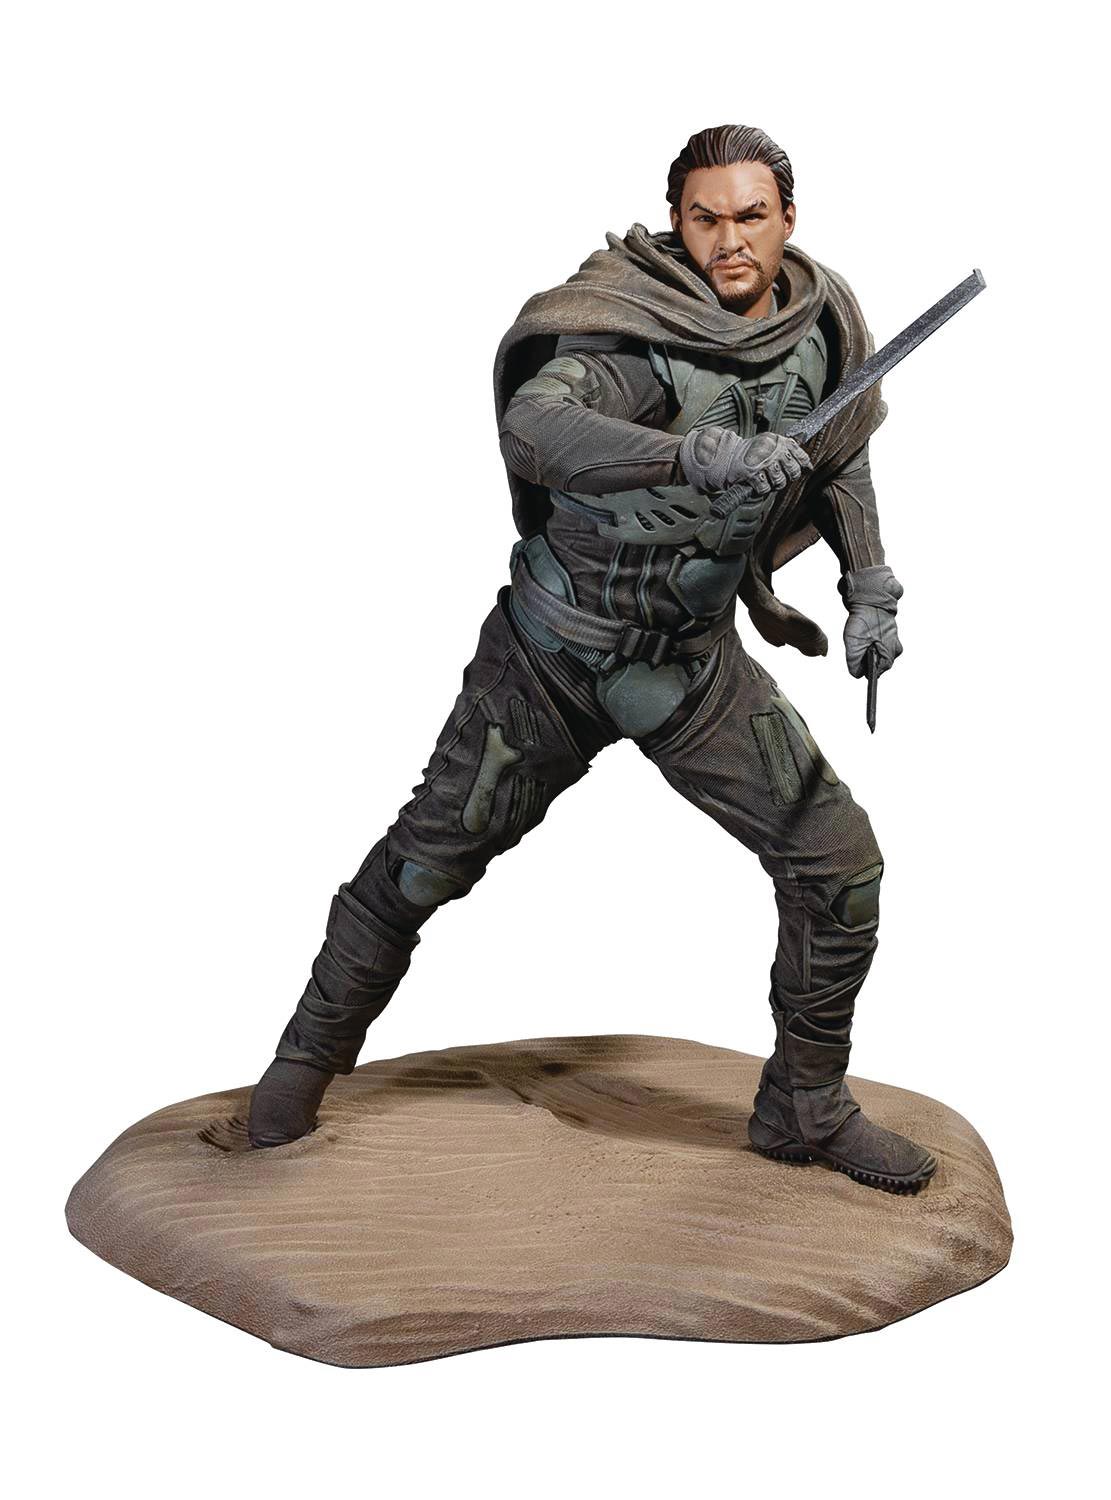 Duncan Idaho figure in the likeness of Jason Momoa, as he appears the Dune movie.